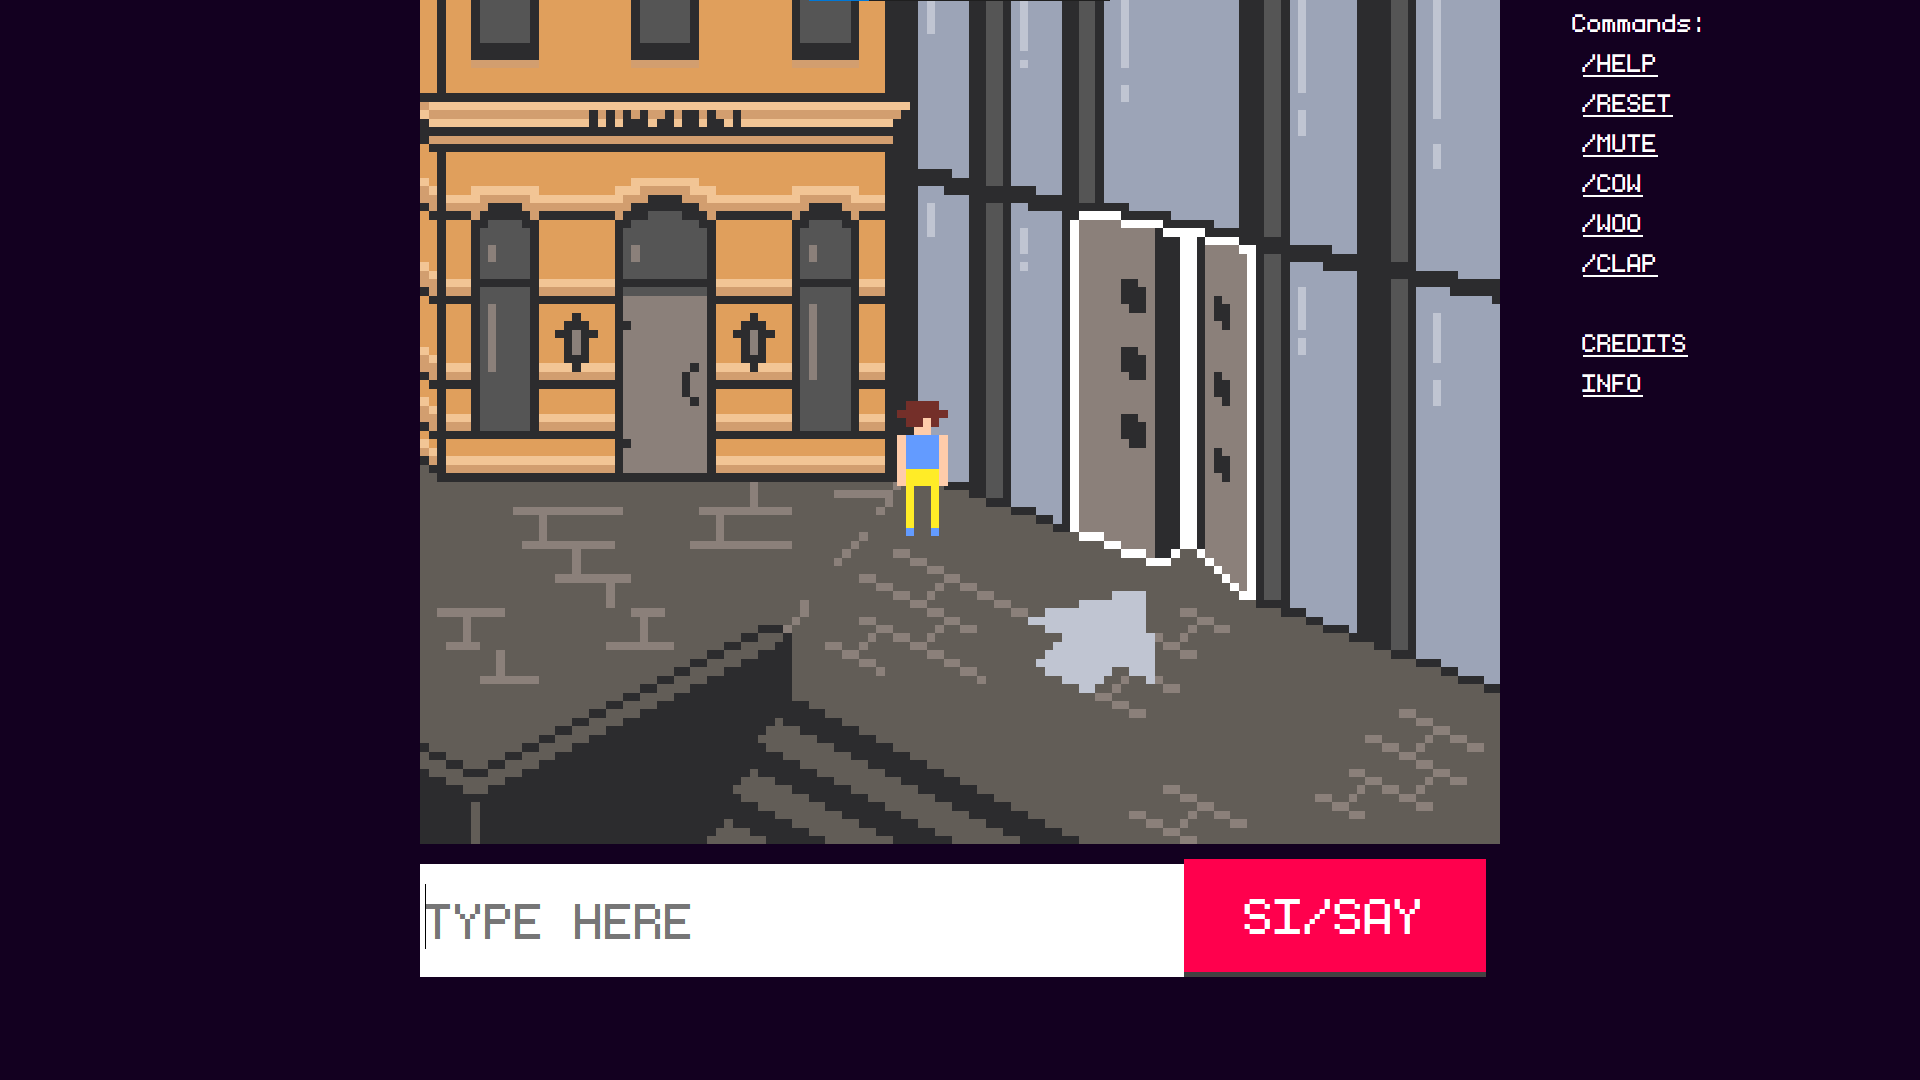 Screenshot of the entrance to the space, a pixellated rendition of the actual museum entrance, by James Morwood.